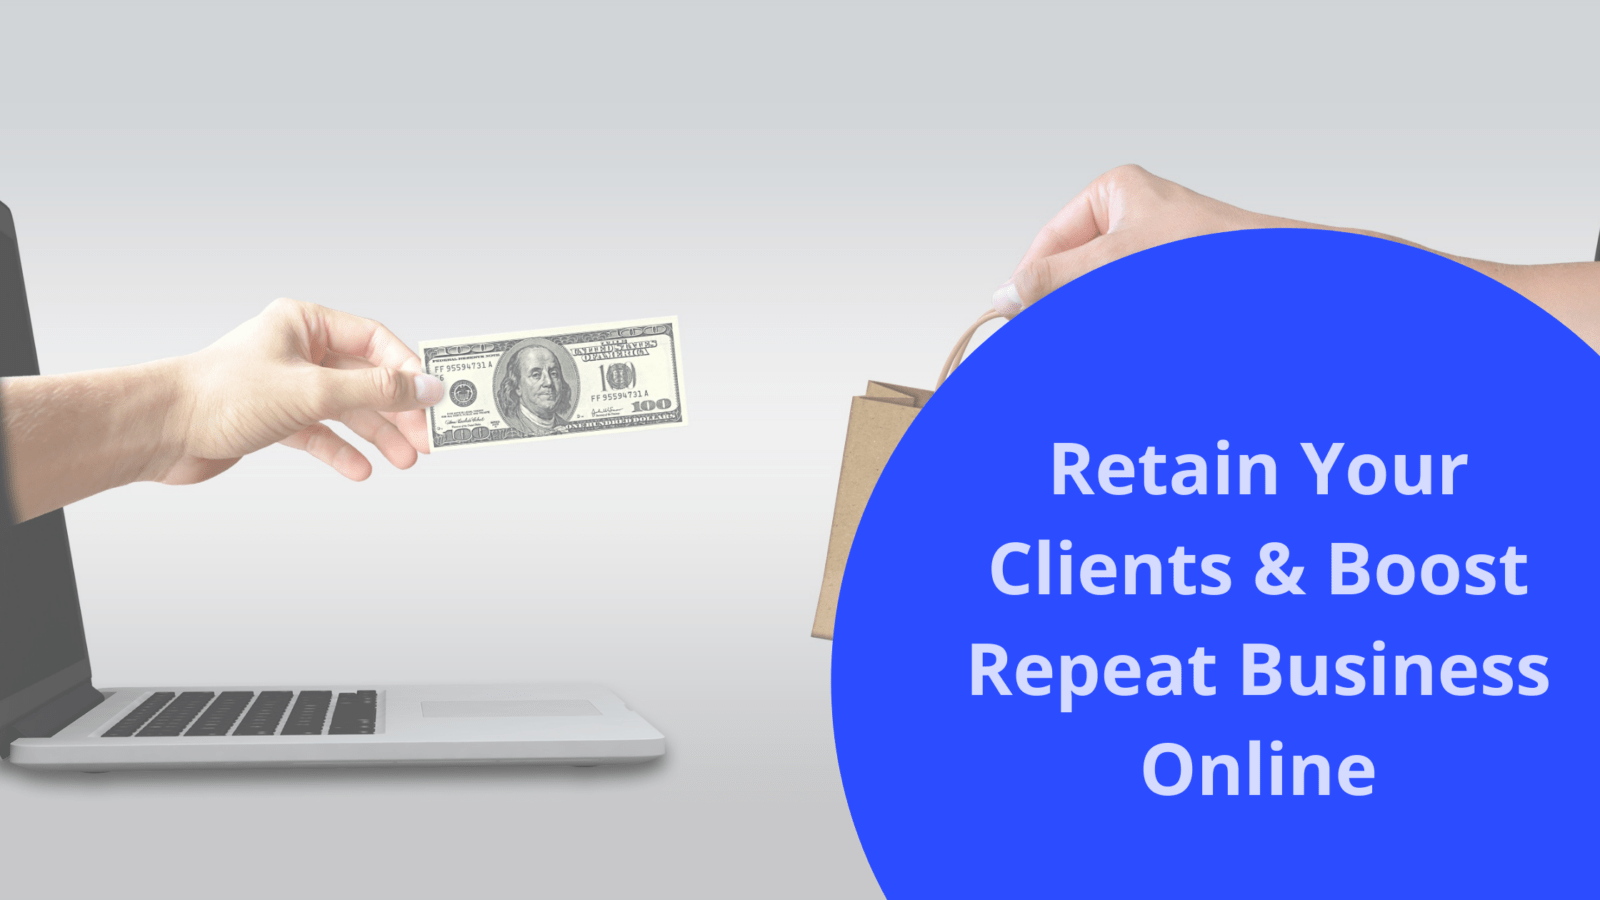 How to retain your clients & boost repeat business online? | bookafy